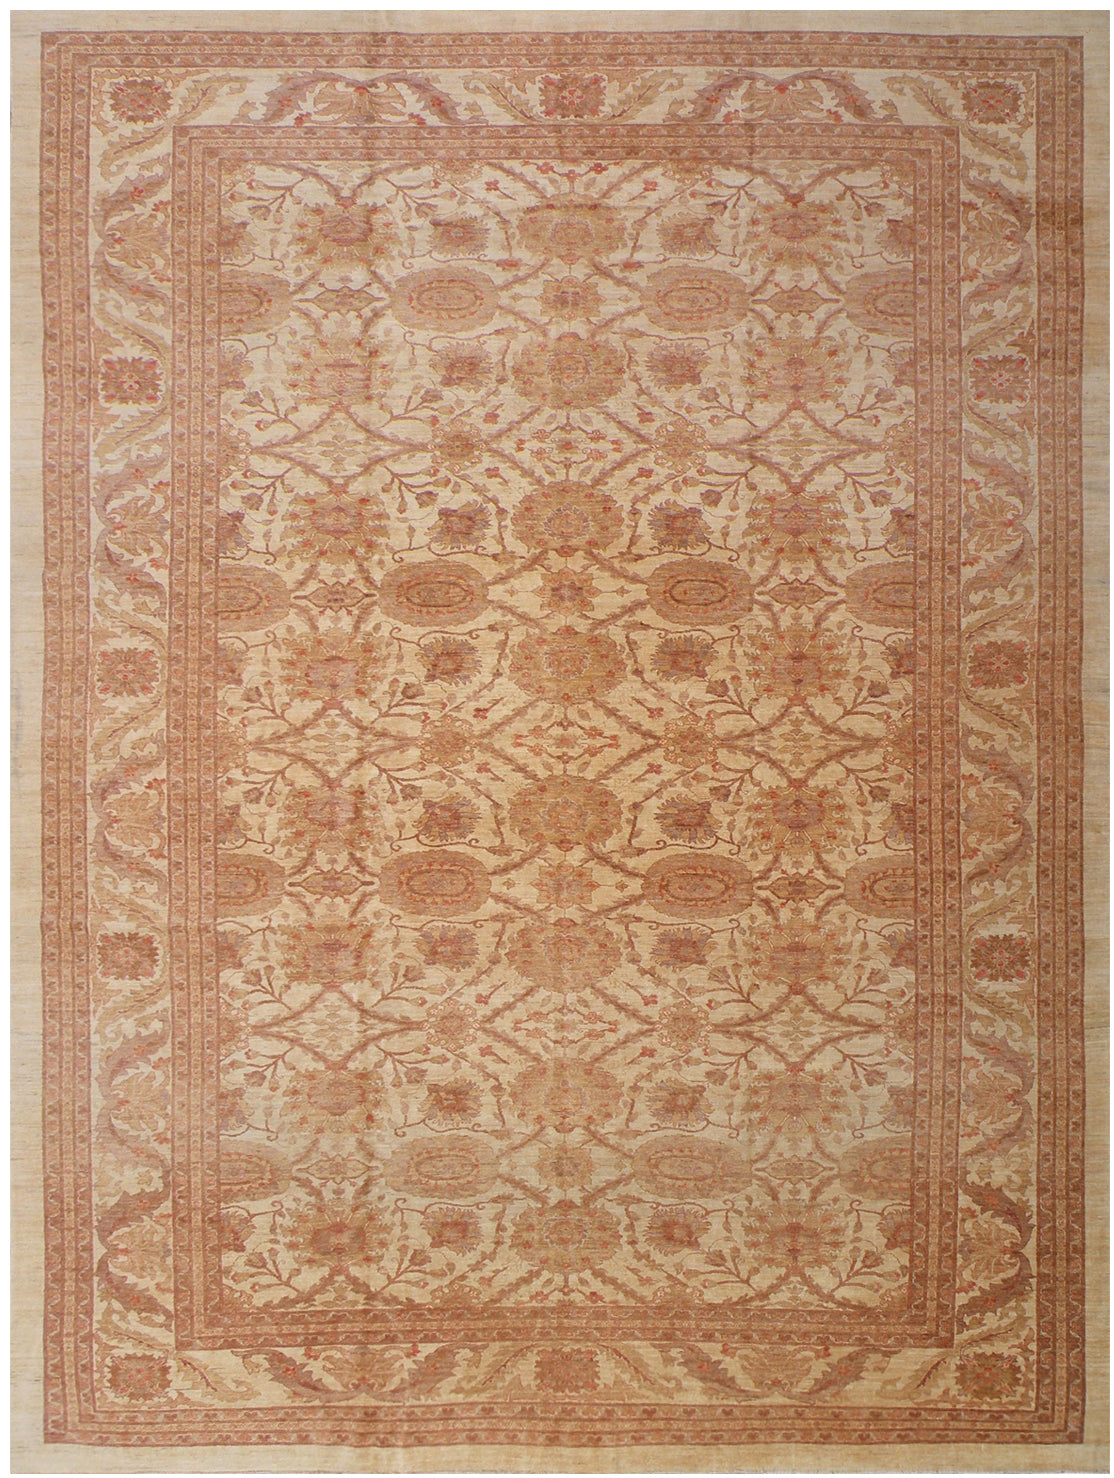 14x19 Large Oushak Design Soft Gold Color Ariana Traditional Rug